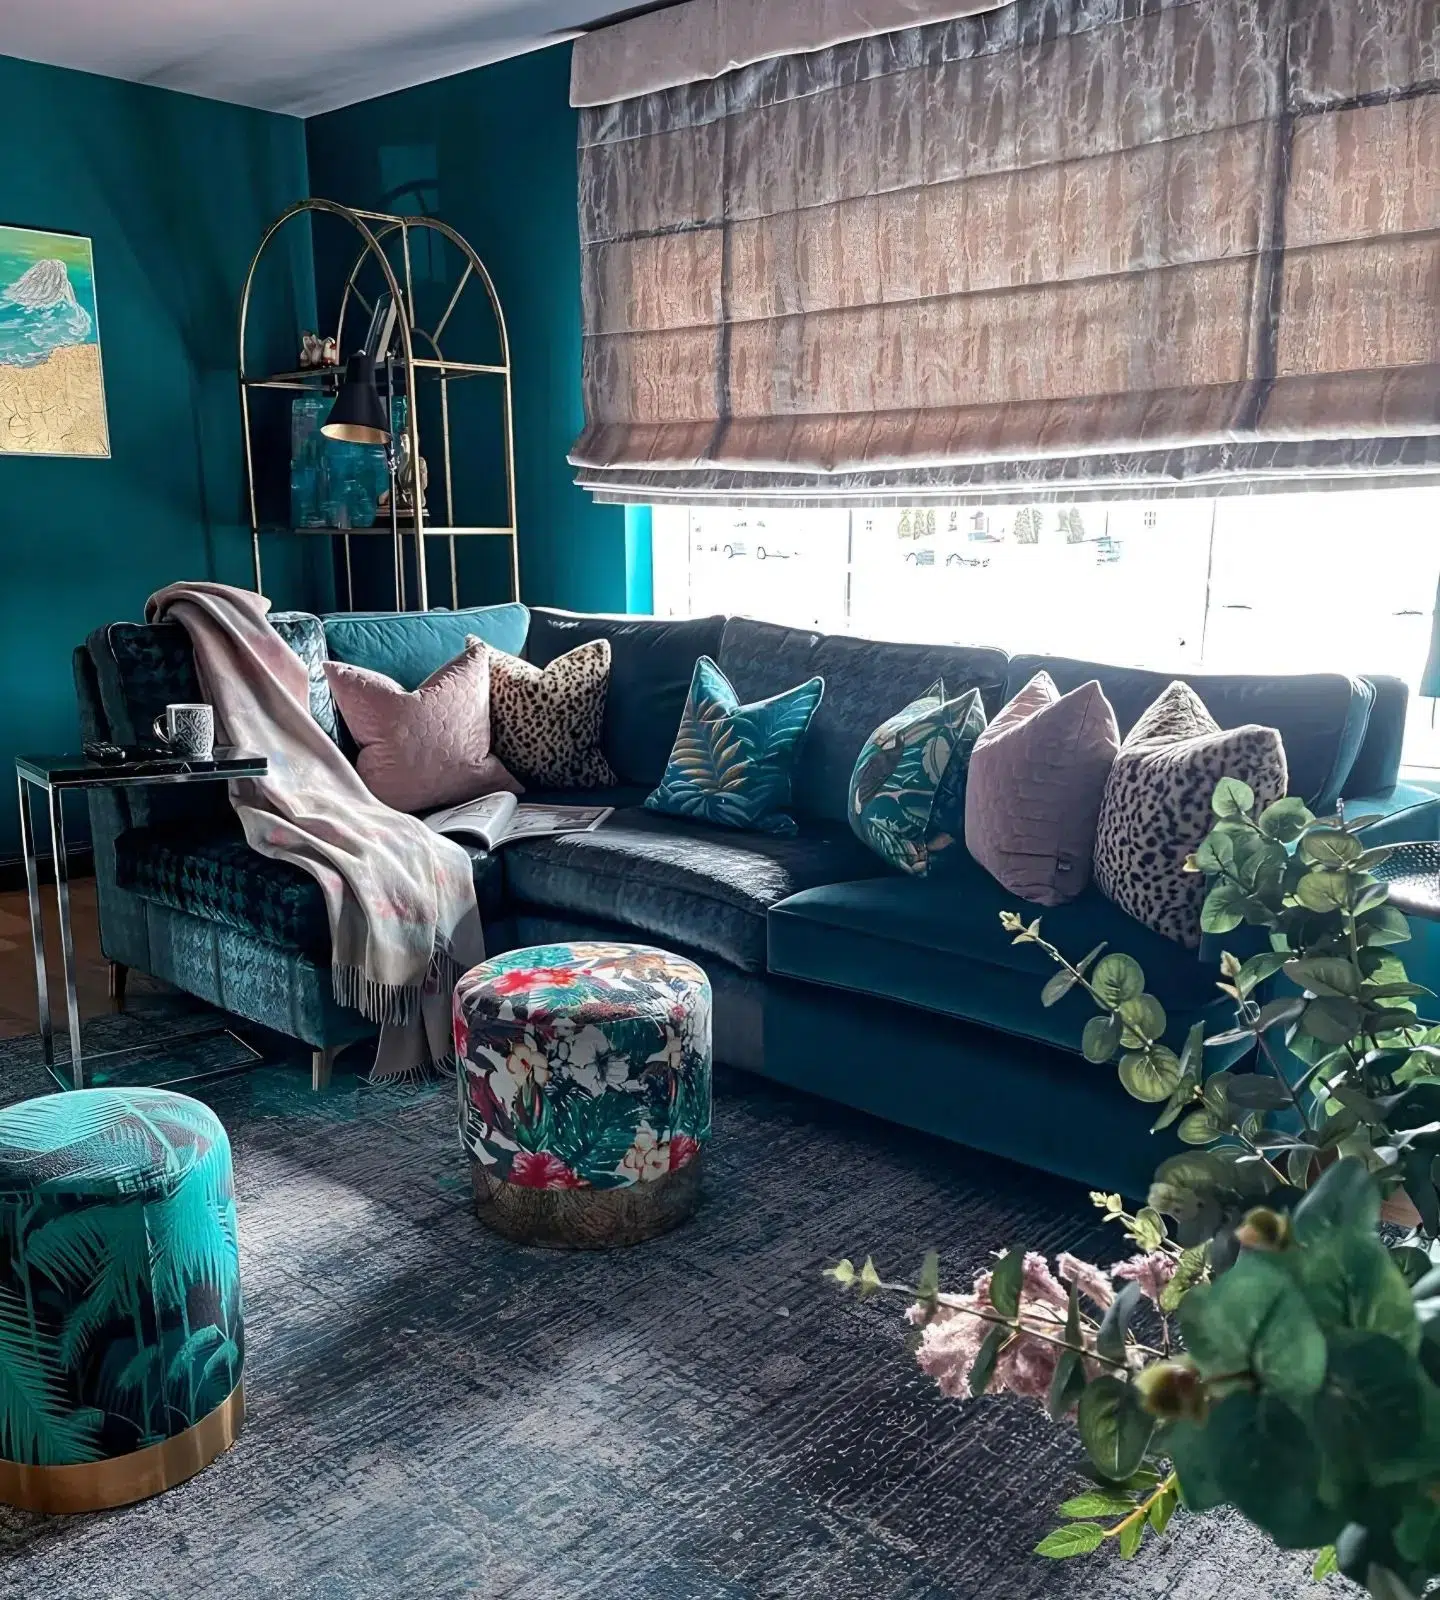 🎨 Deep Teal from the Pantone Colour Collection by @fleetwood_paints is used to perfection in this interior design by the brilliant @lanadullaghandesigns !